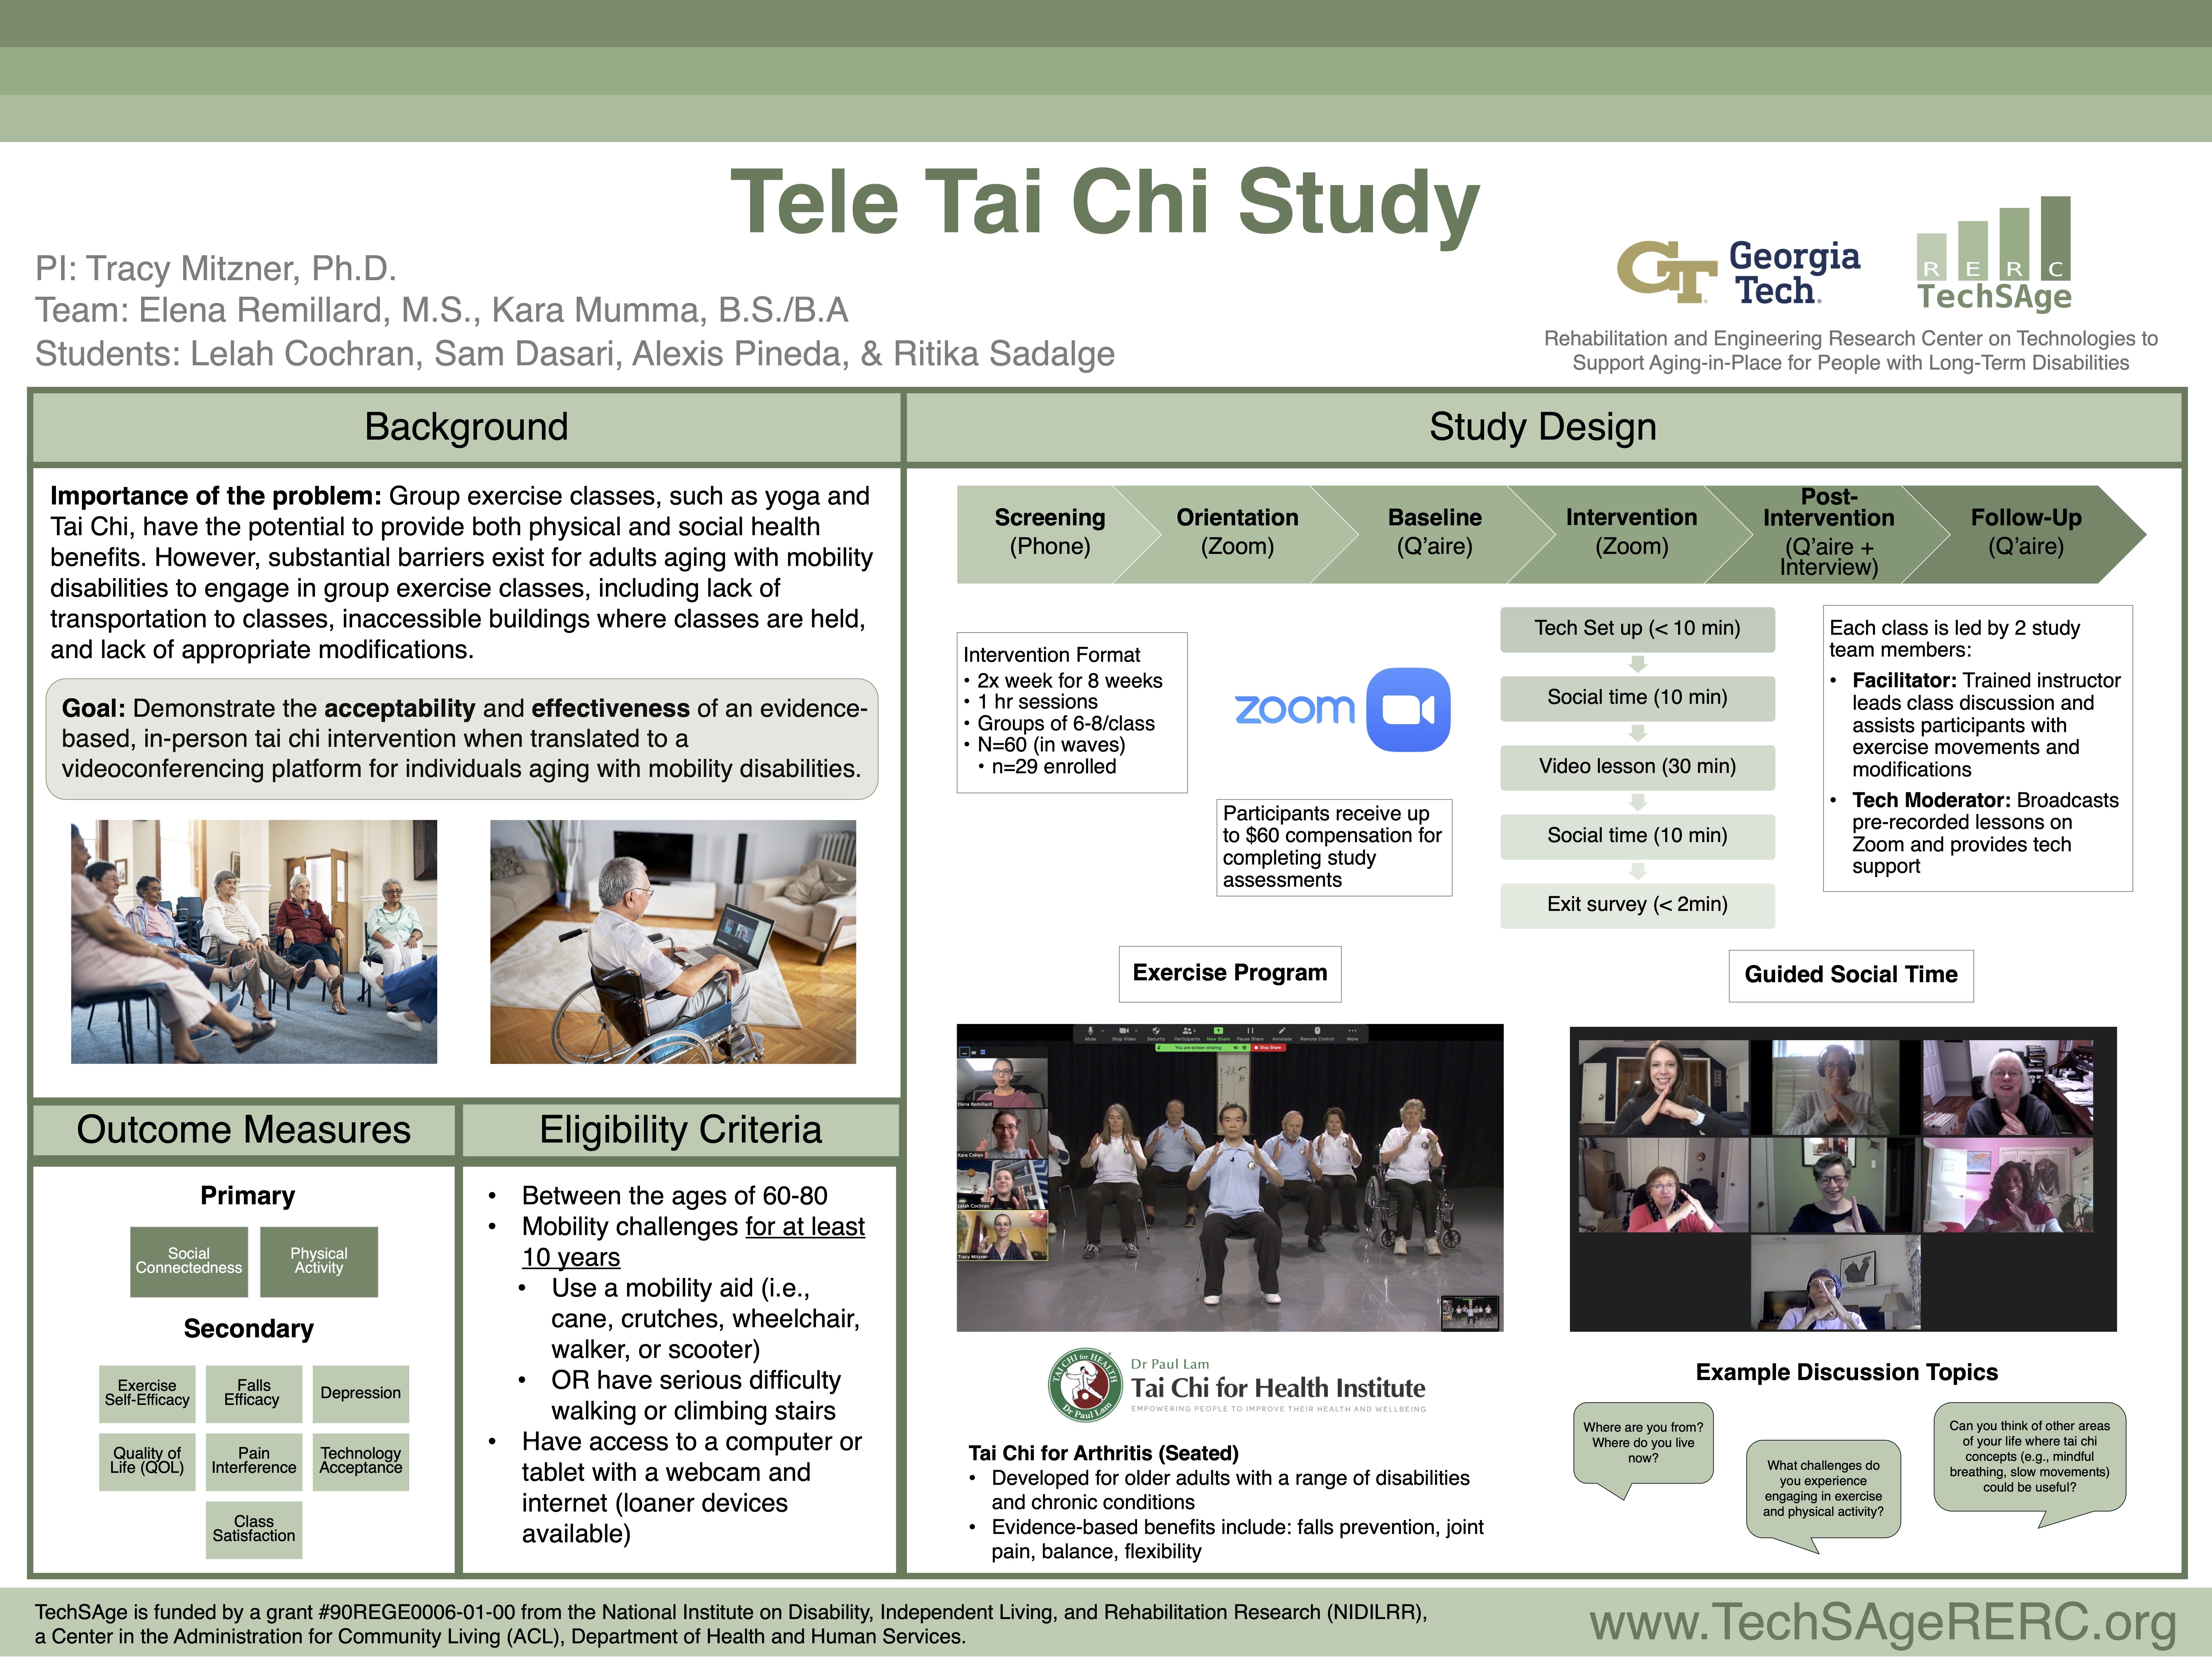 Overview poster of the Tele Tai Chi project